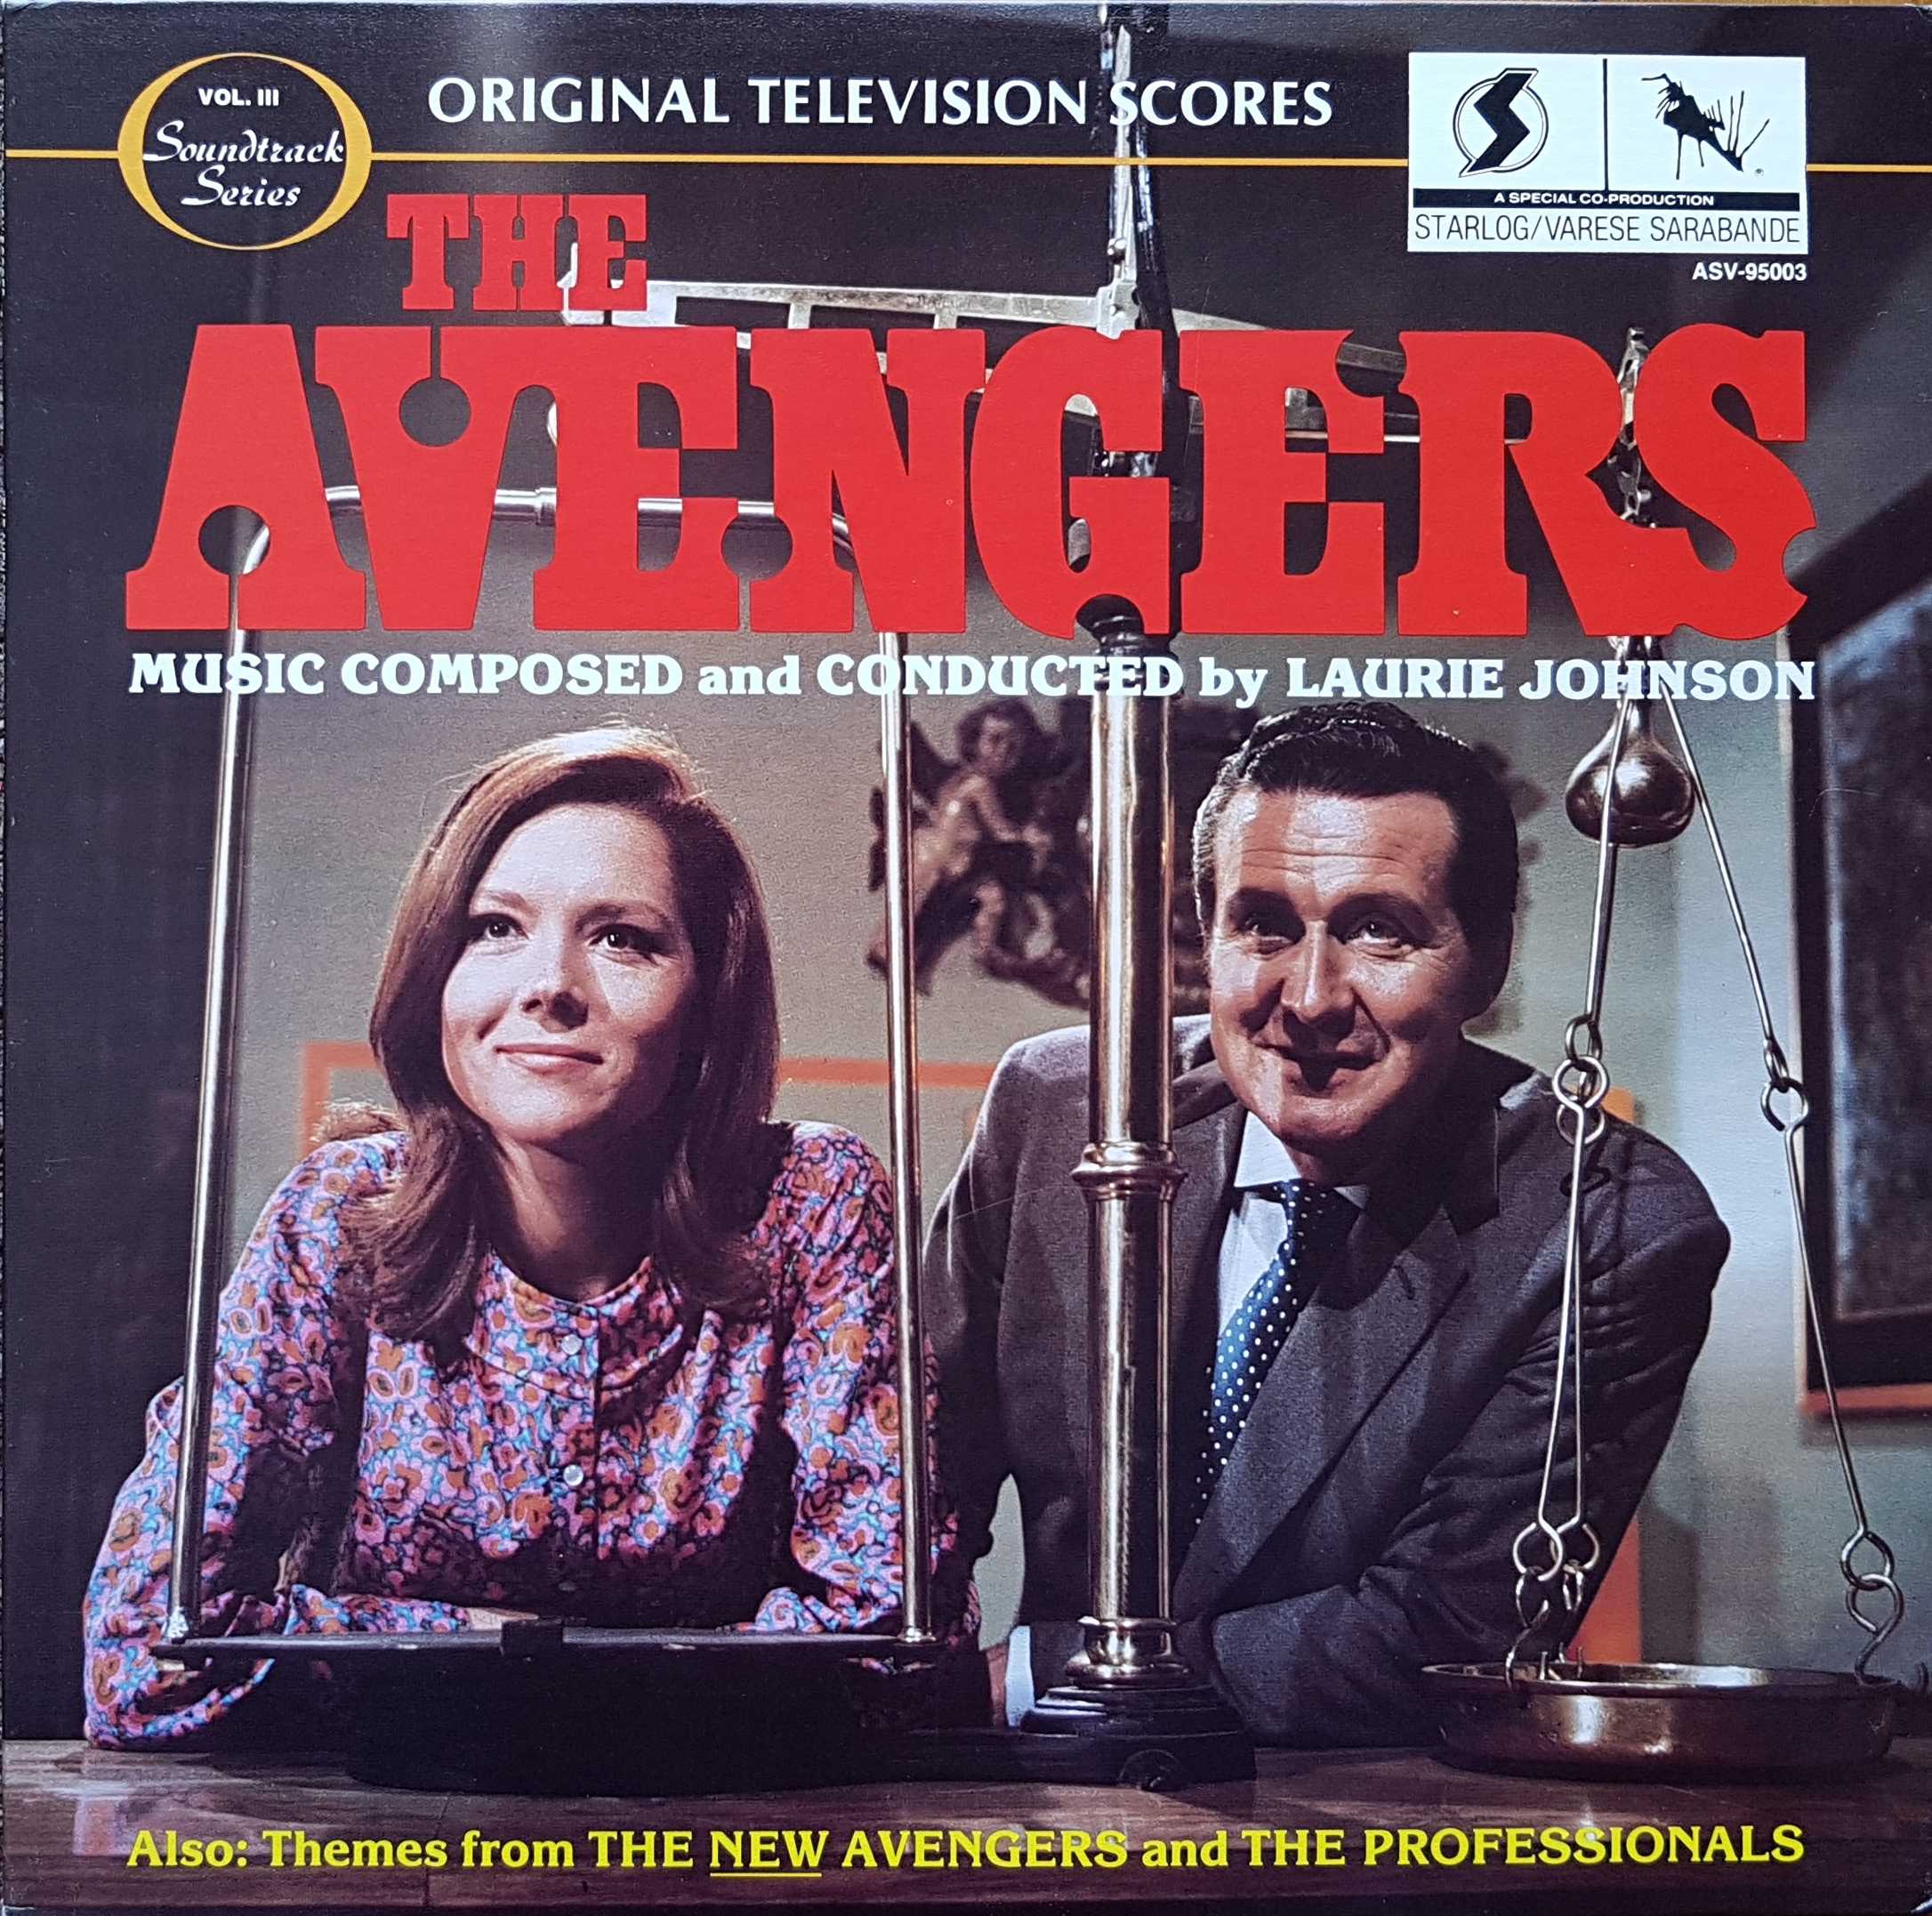 Picture of ASC - 90053 The avengers / The professionals by artist Laurie Johnson from ITV, Channel 4 and Channel 5 albums library